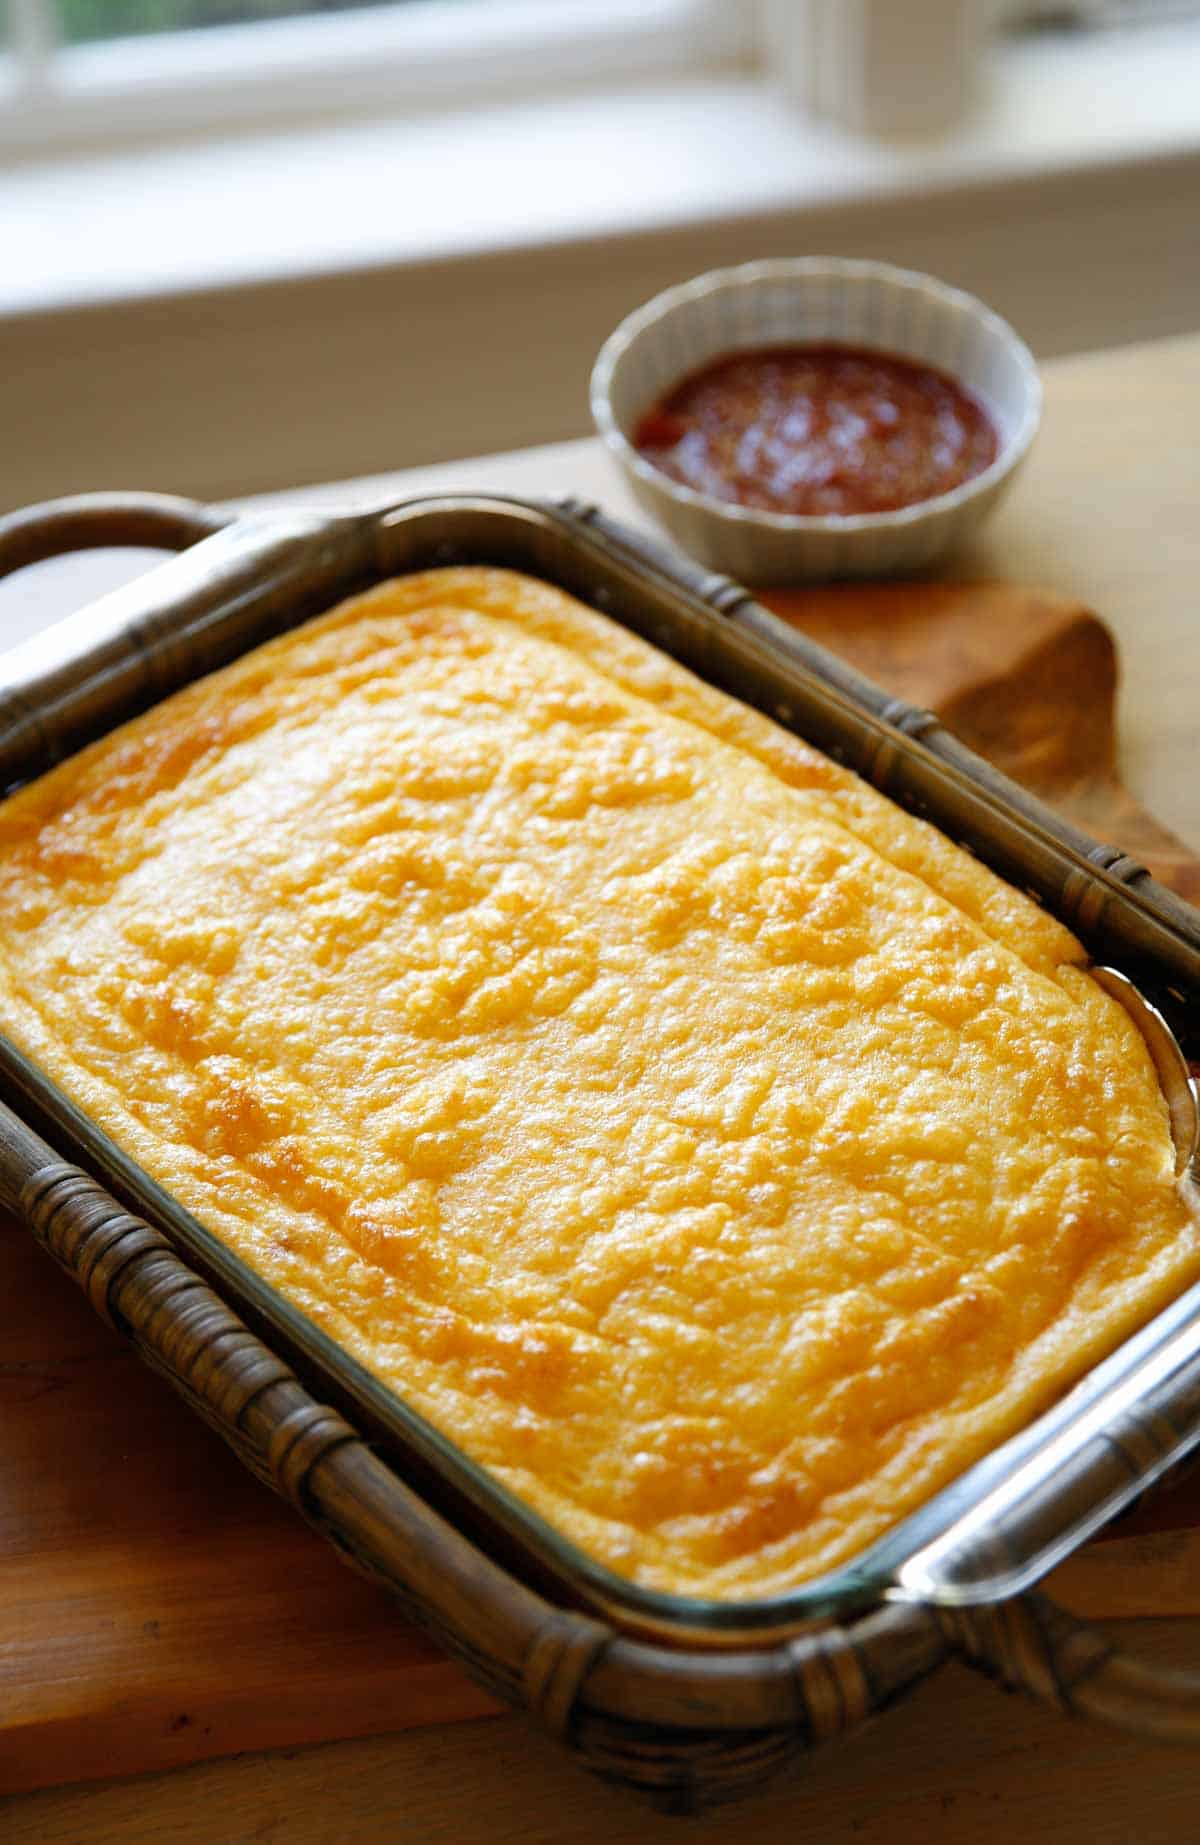 A fully baked Puffy Egg Bake casserole in basket cozy